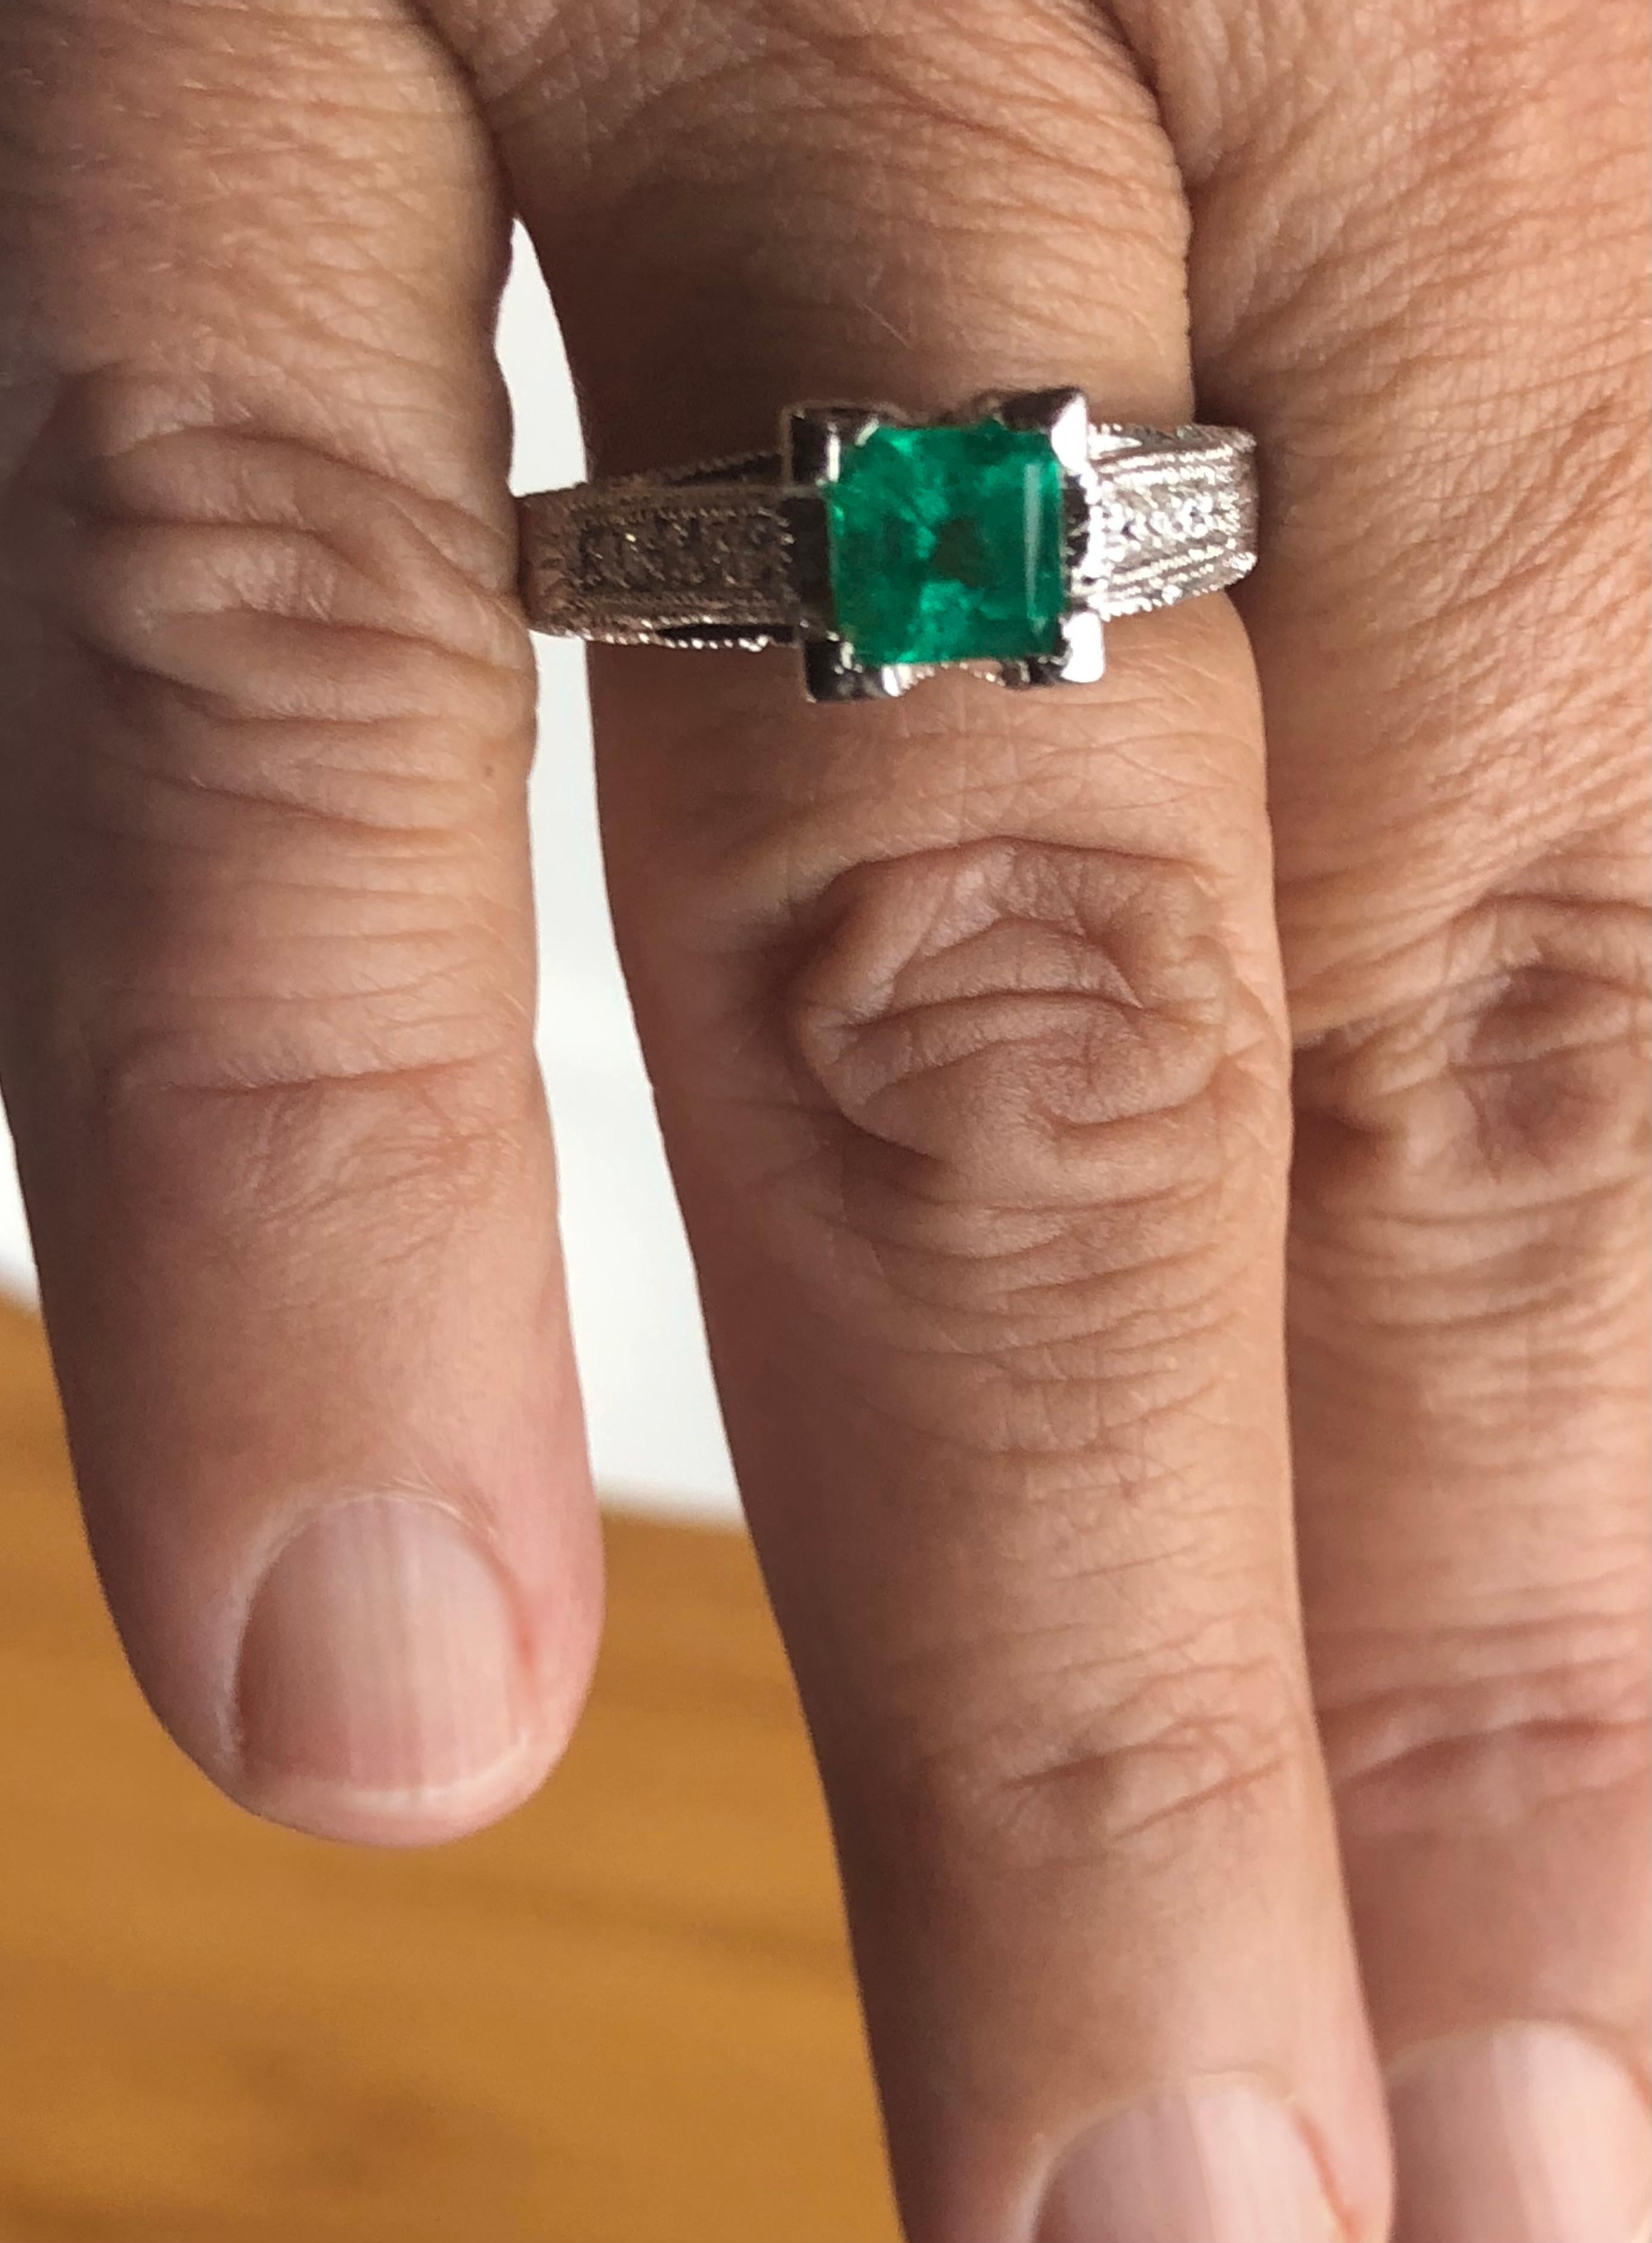 1.65 Carat Colombian Natural Emerald Diamond Engagement Wedding Ring Platinum
Composition: Solid Platinum
Primary Stone: Natural Colombian Emerald
Shape or Cut: Square Cut
Emerald Weight: Approx. 1.15 Carats (1 emerald)
Measurements Emerald: